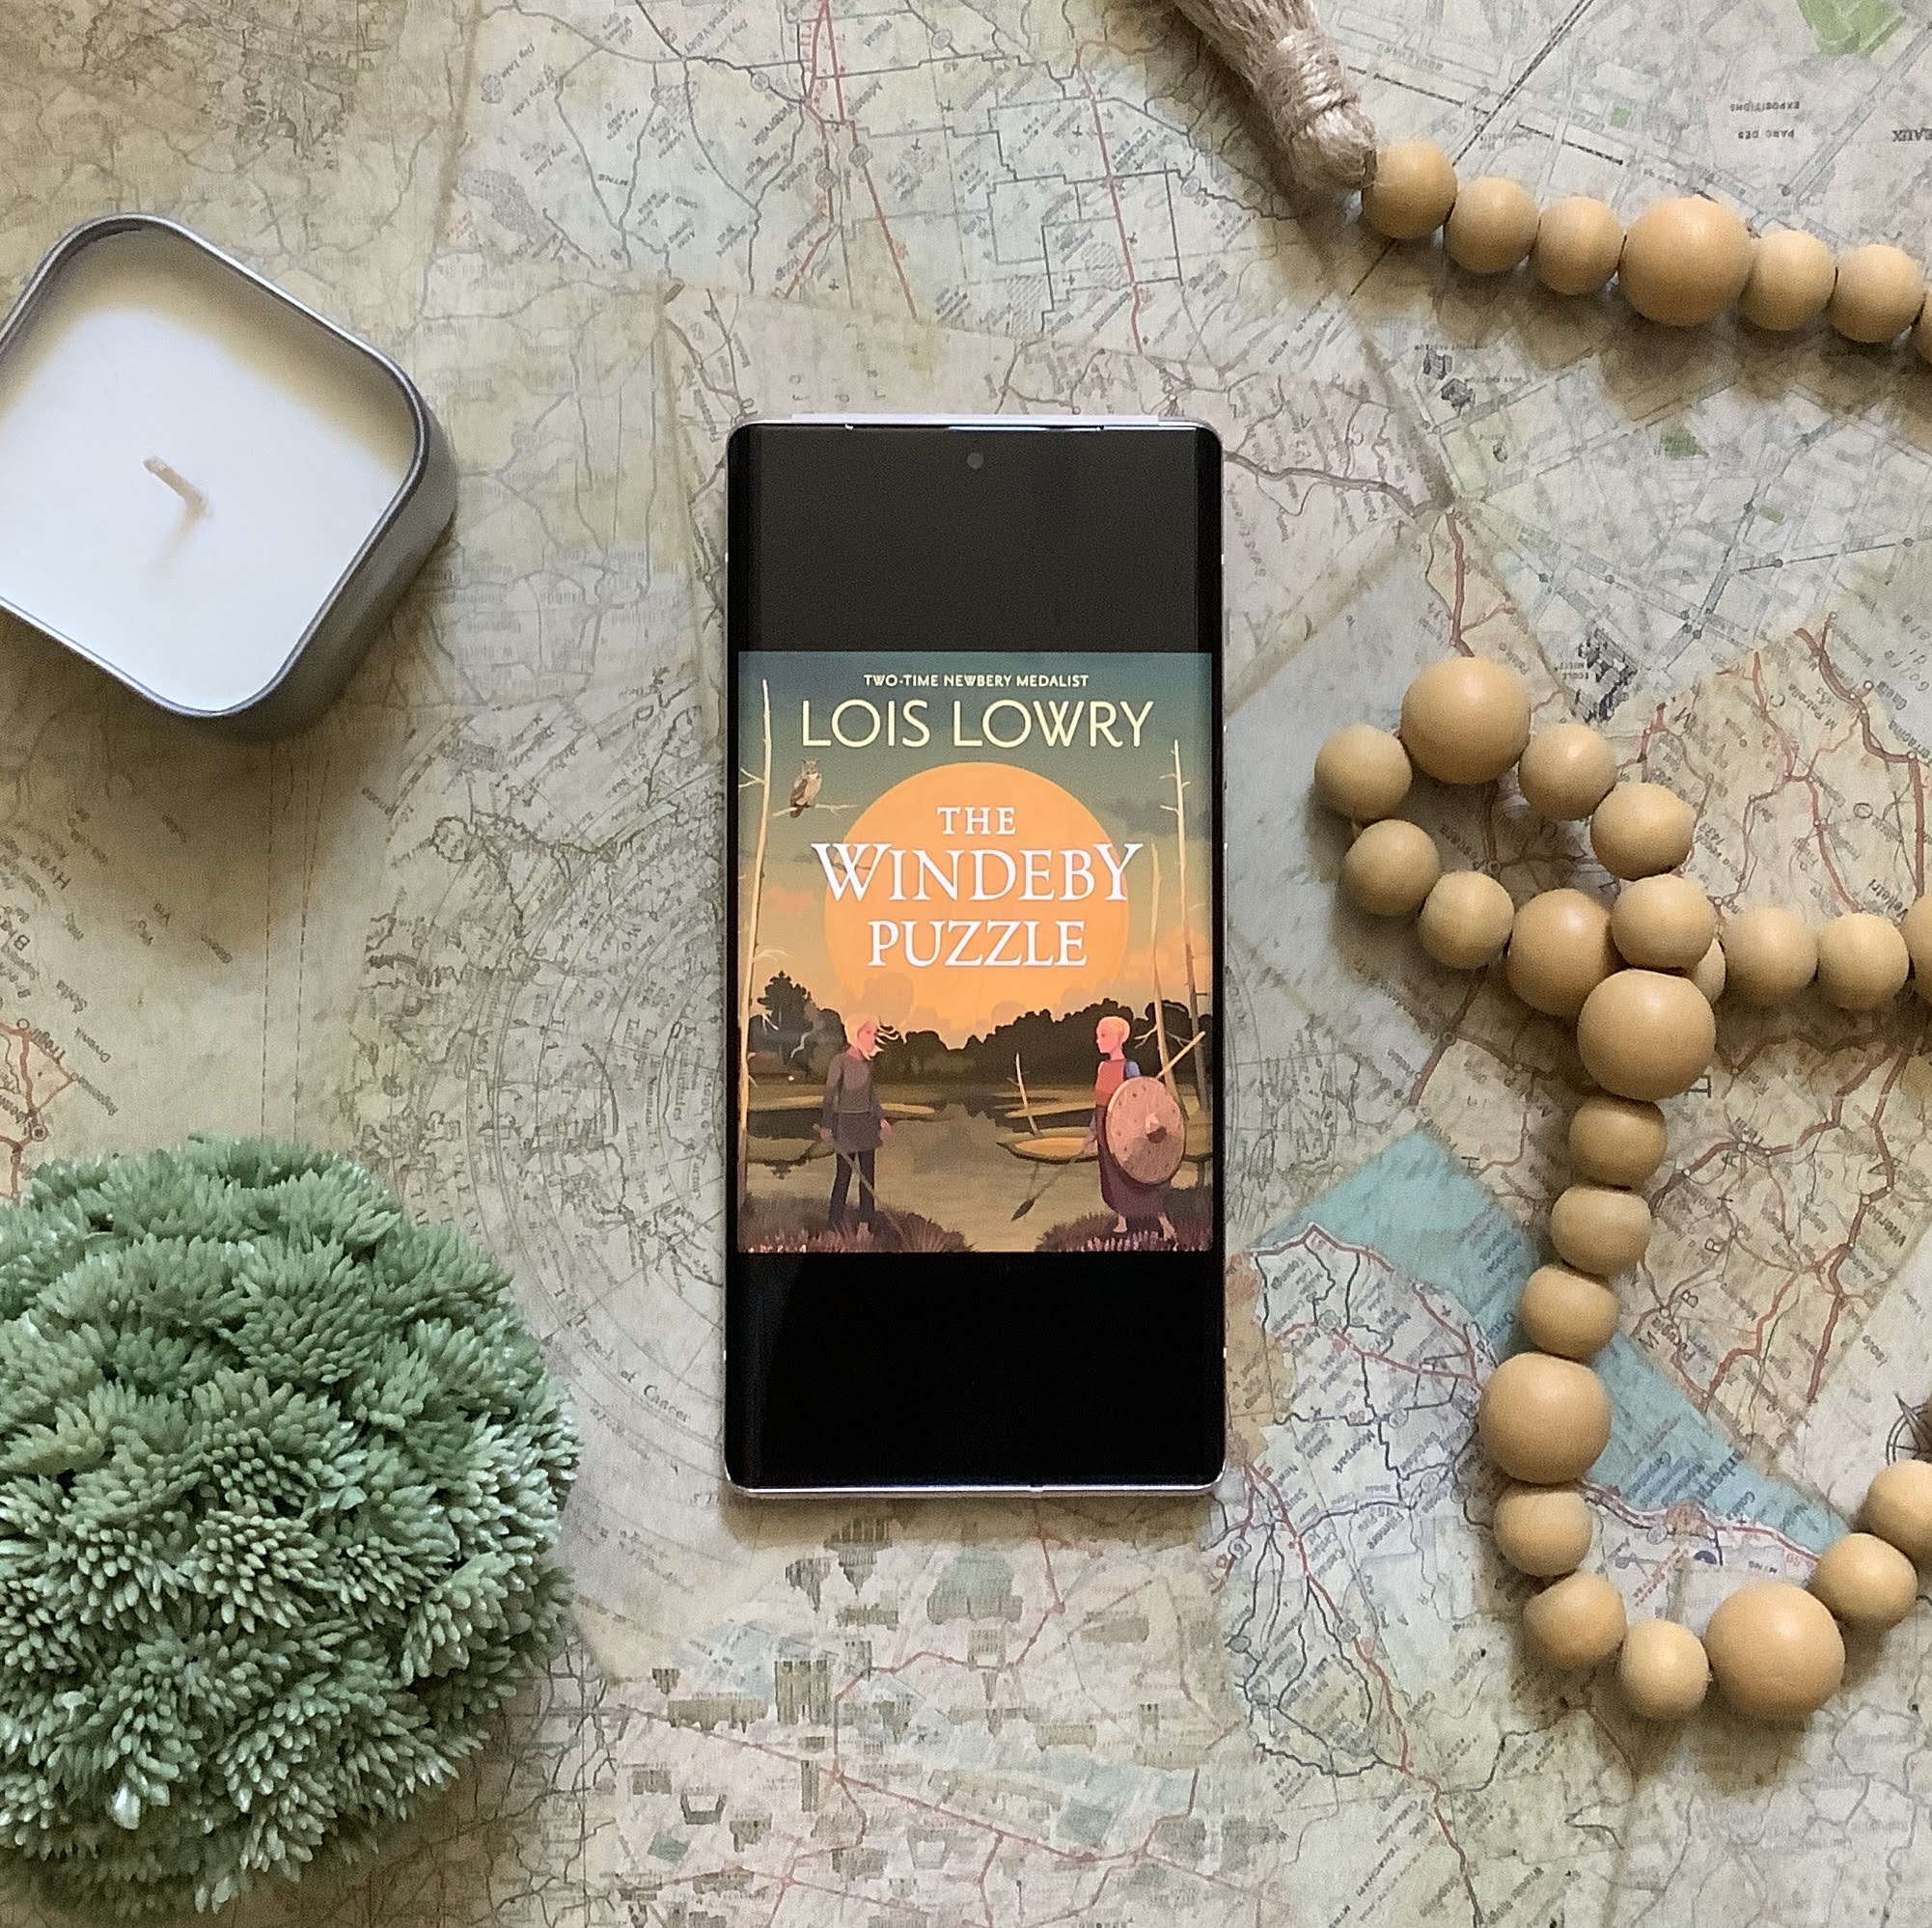 The Windeby Puzzle by Lois Lowry. Ebook cover on a phone with other decorations. A YA historical fiction.